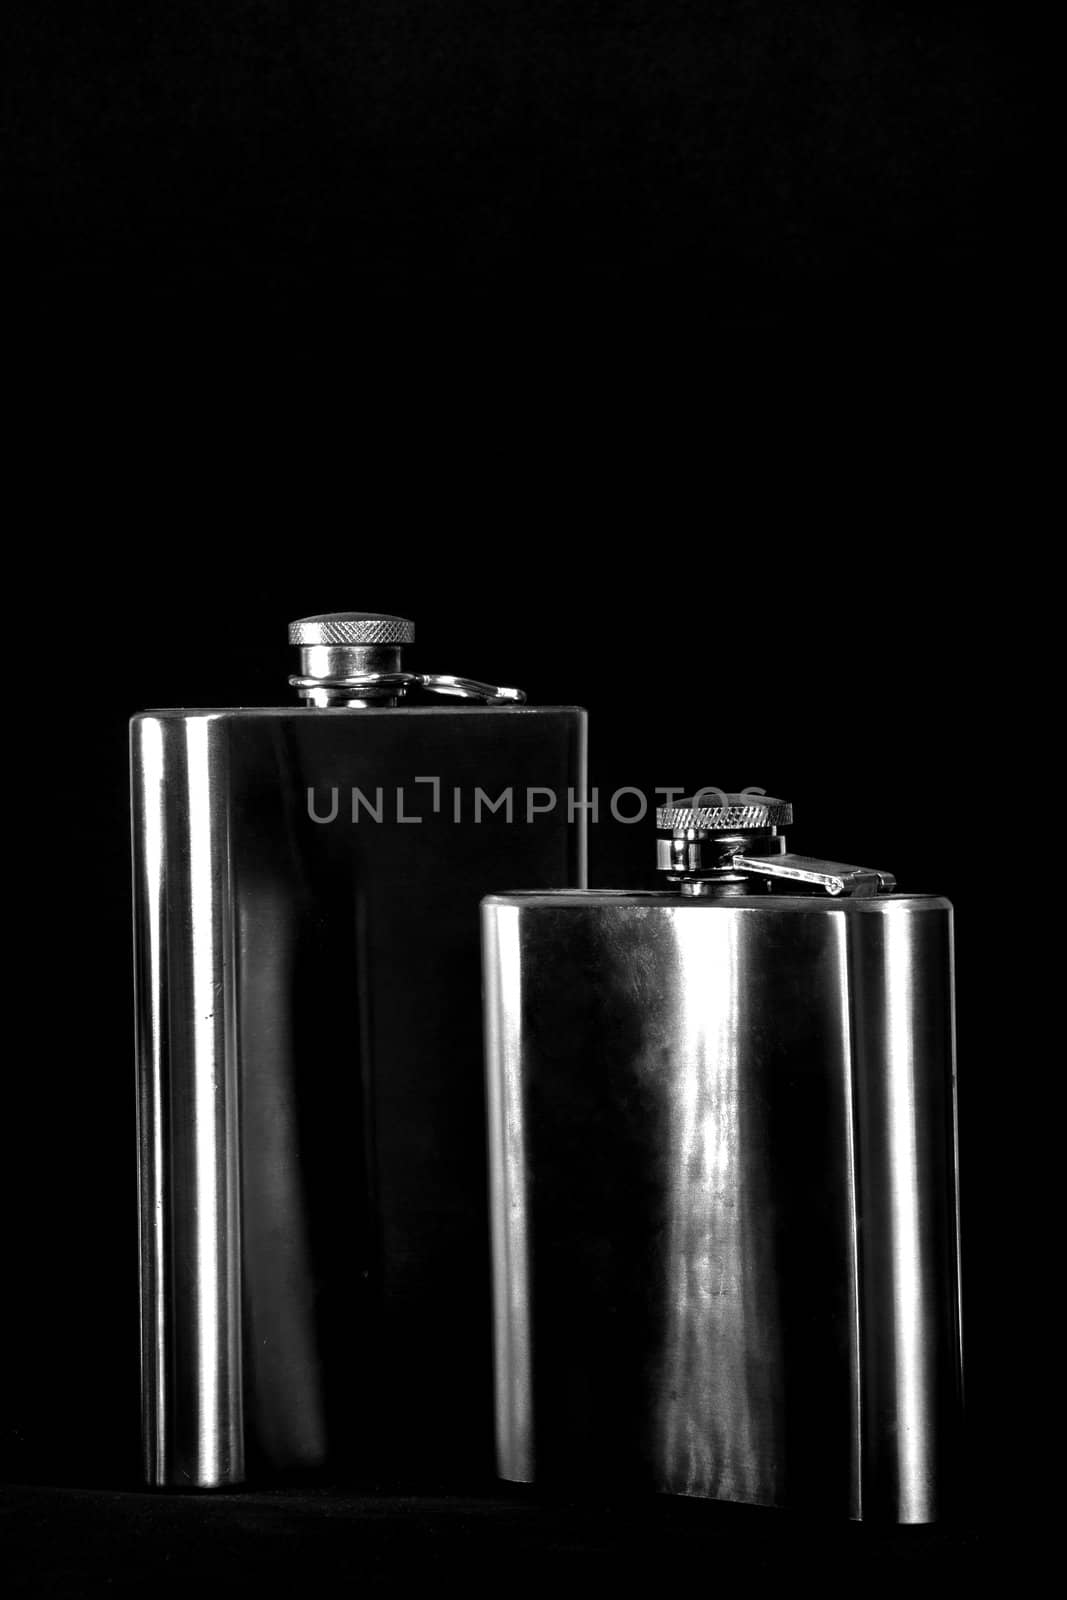 One of the most favorite men's toy - a metal flask for alcoholic beverages. Two used jars of stainless steel for whiskey or brandy